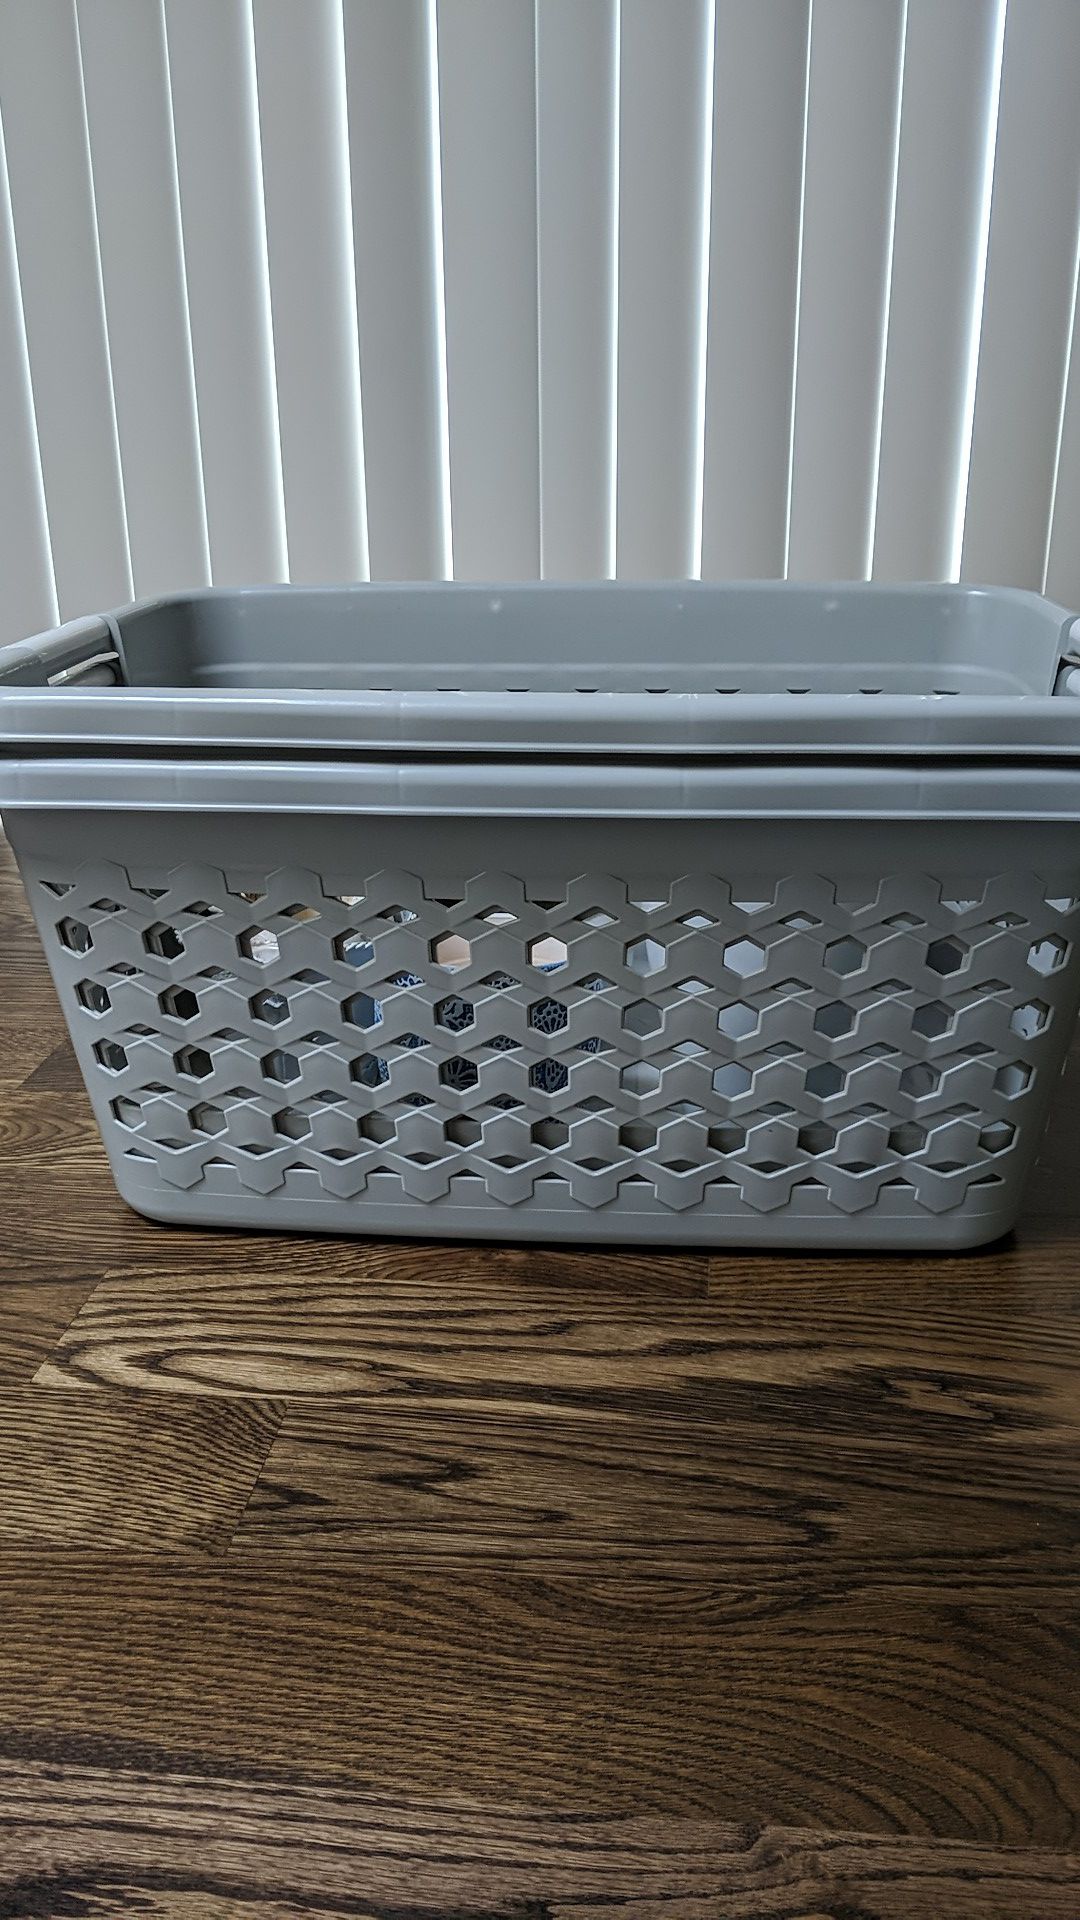 Two laundry baskets